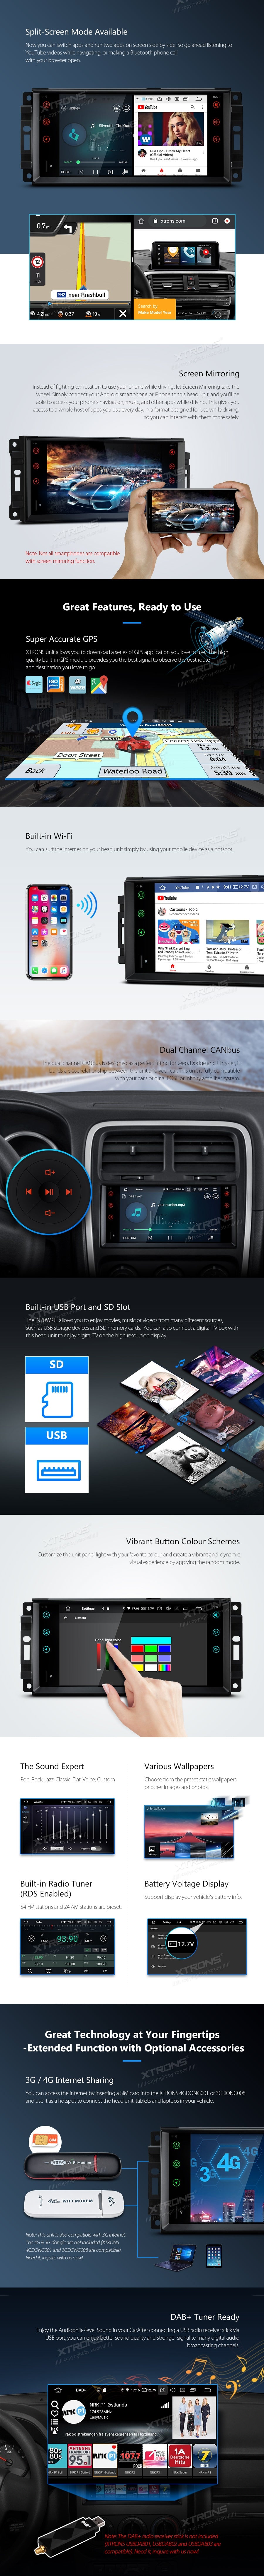 Jeep, Dodge, Chrysler Android stereo